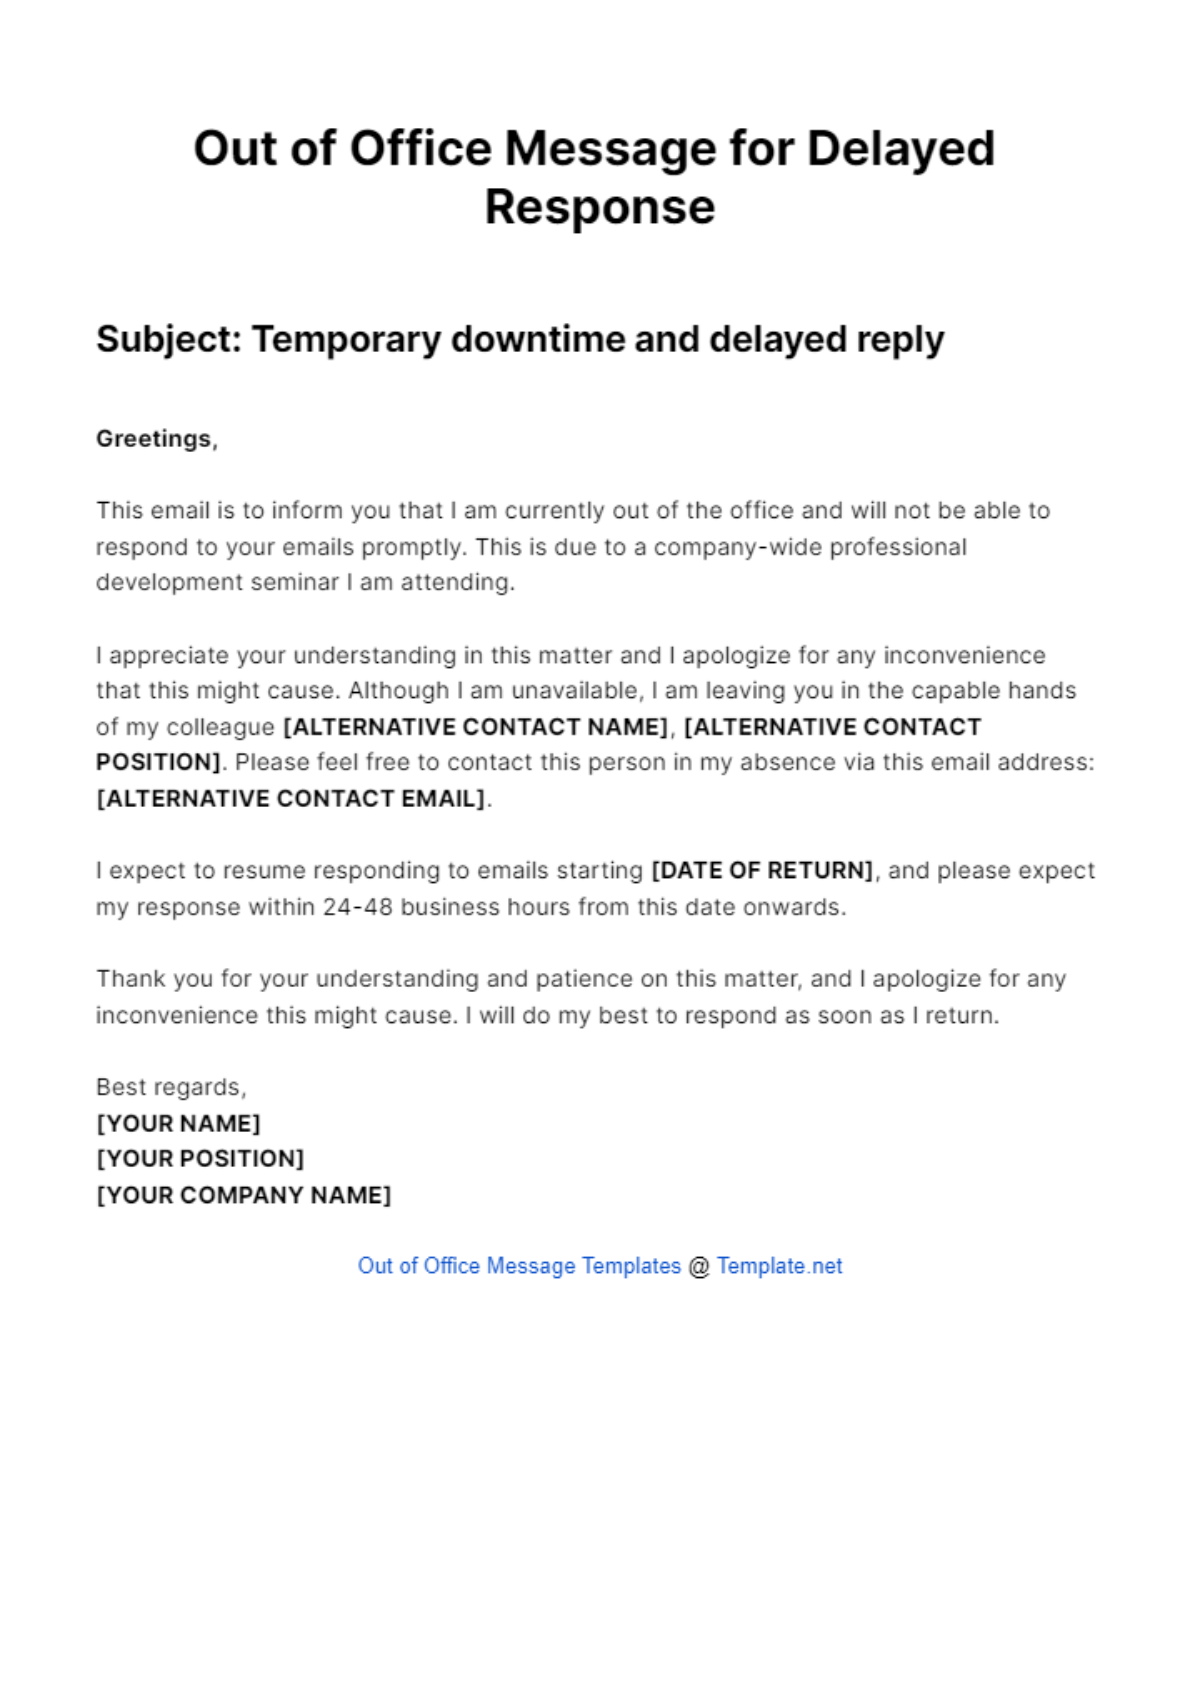 Out of Office Message for Delayed Response Template